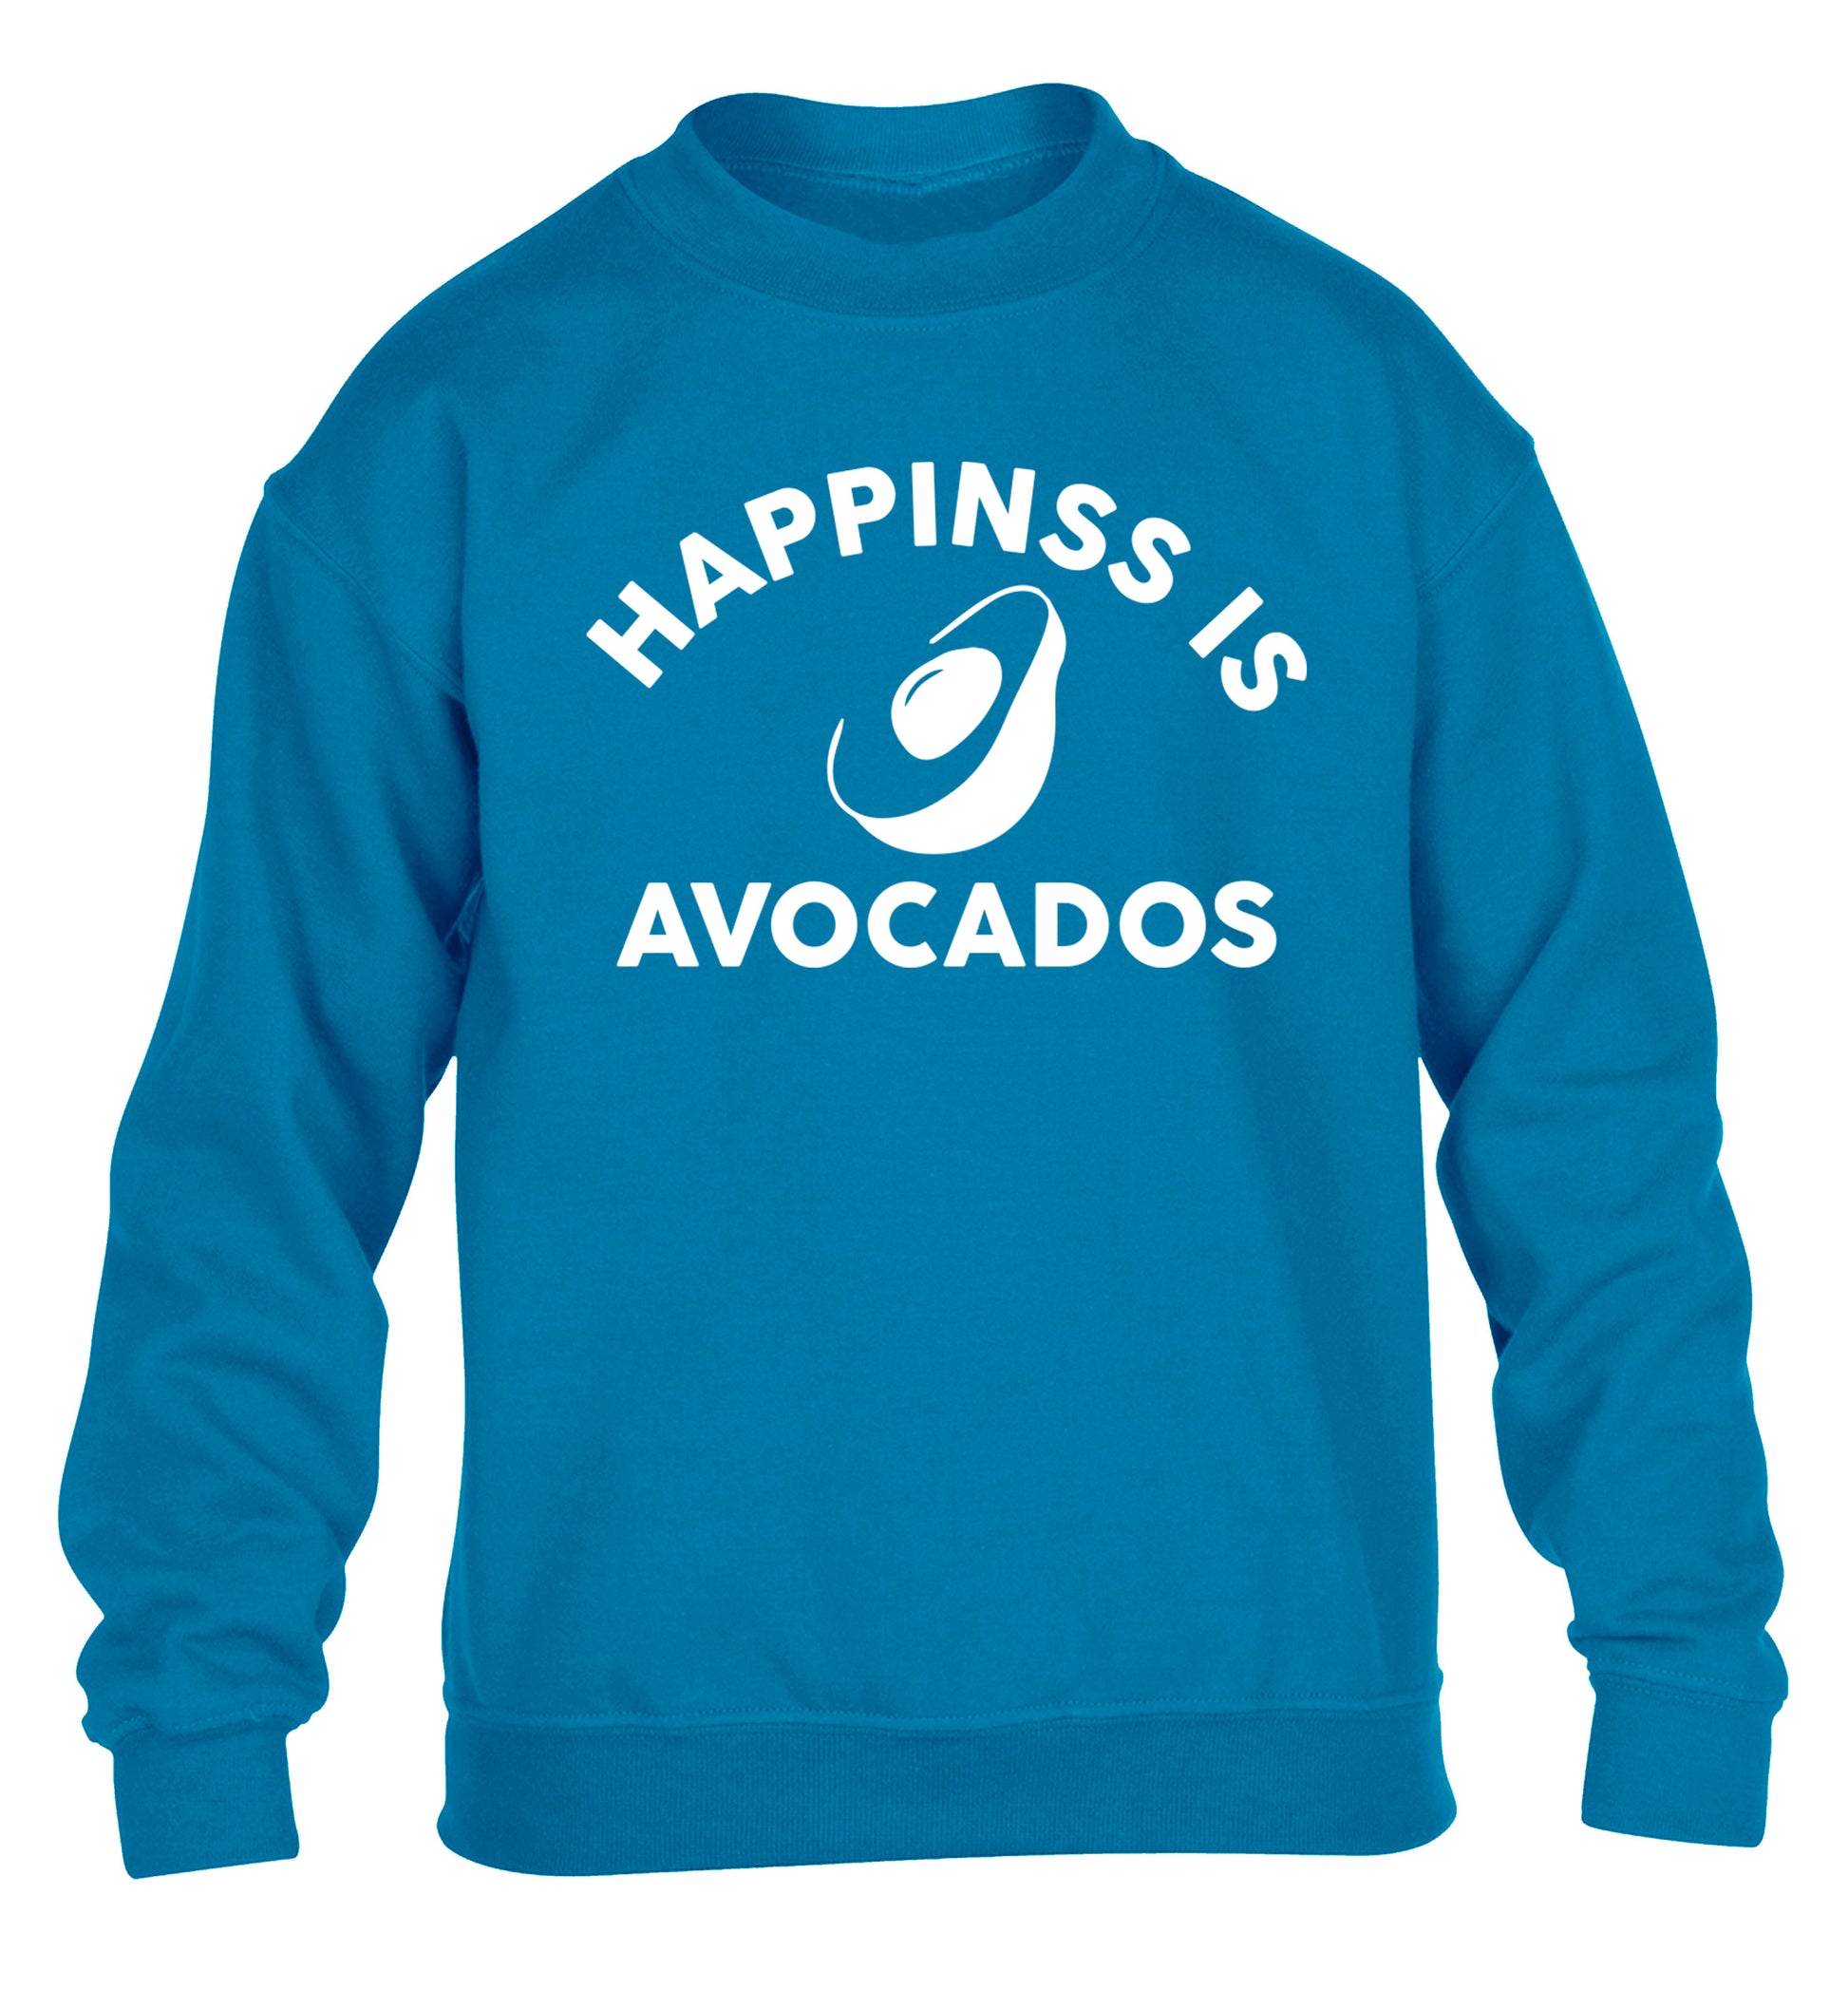 Happiness is avocados children's blue sweater 12-14 Years